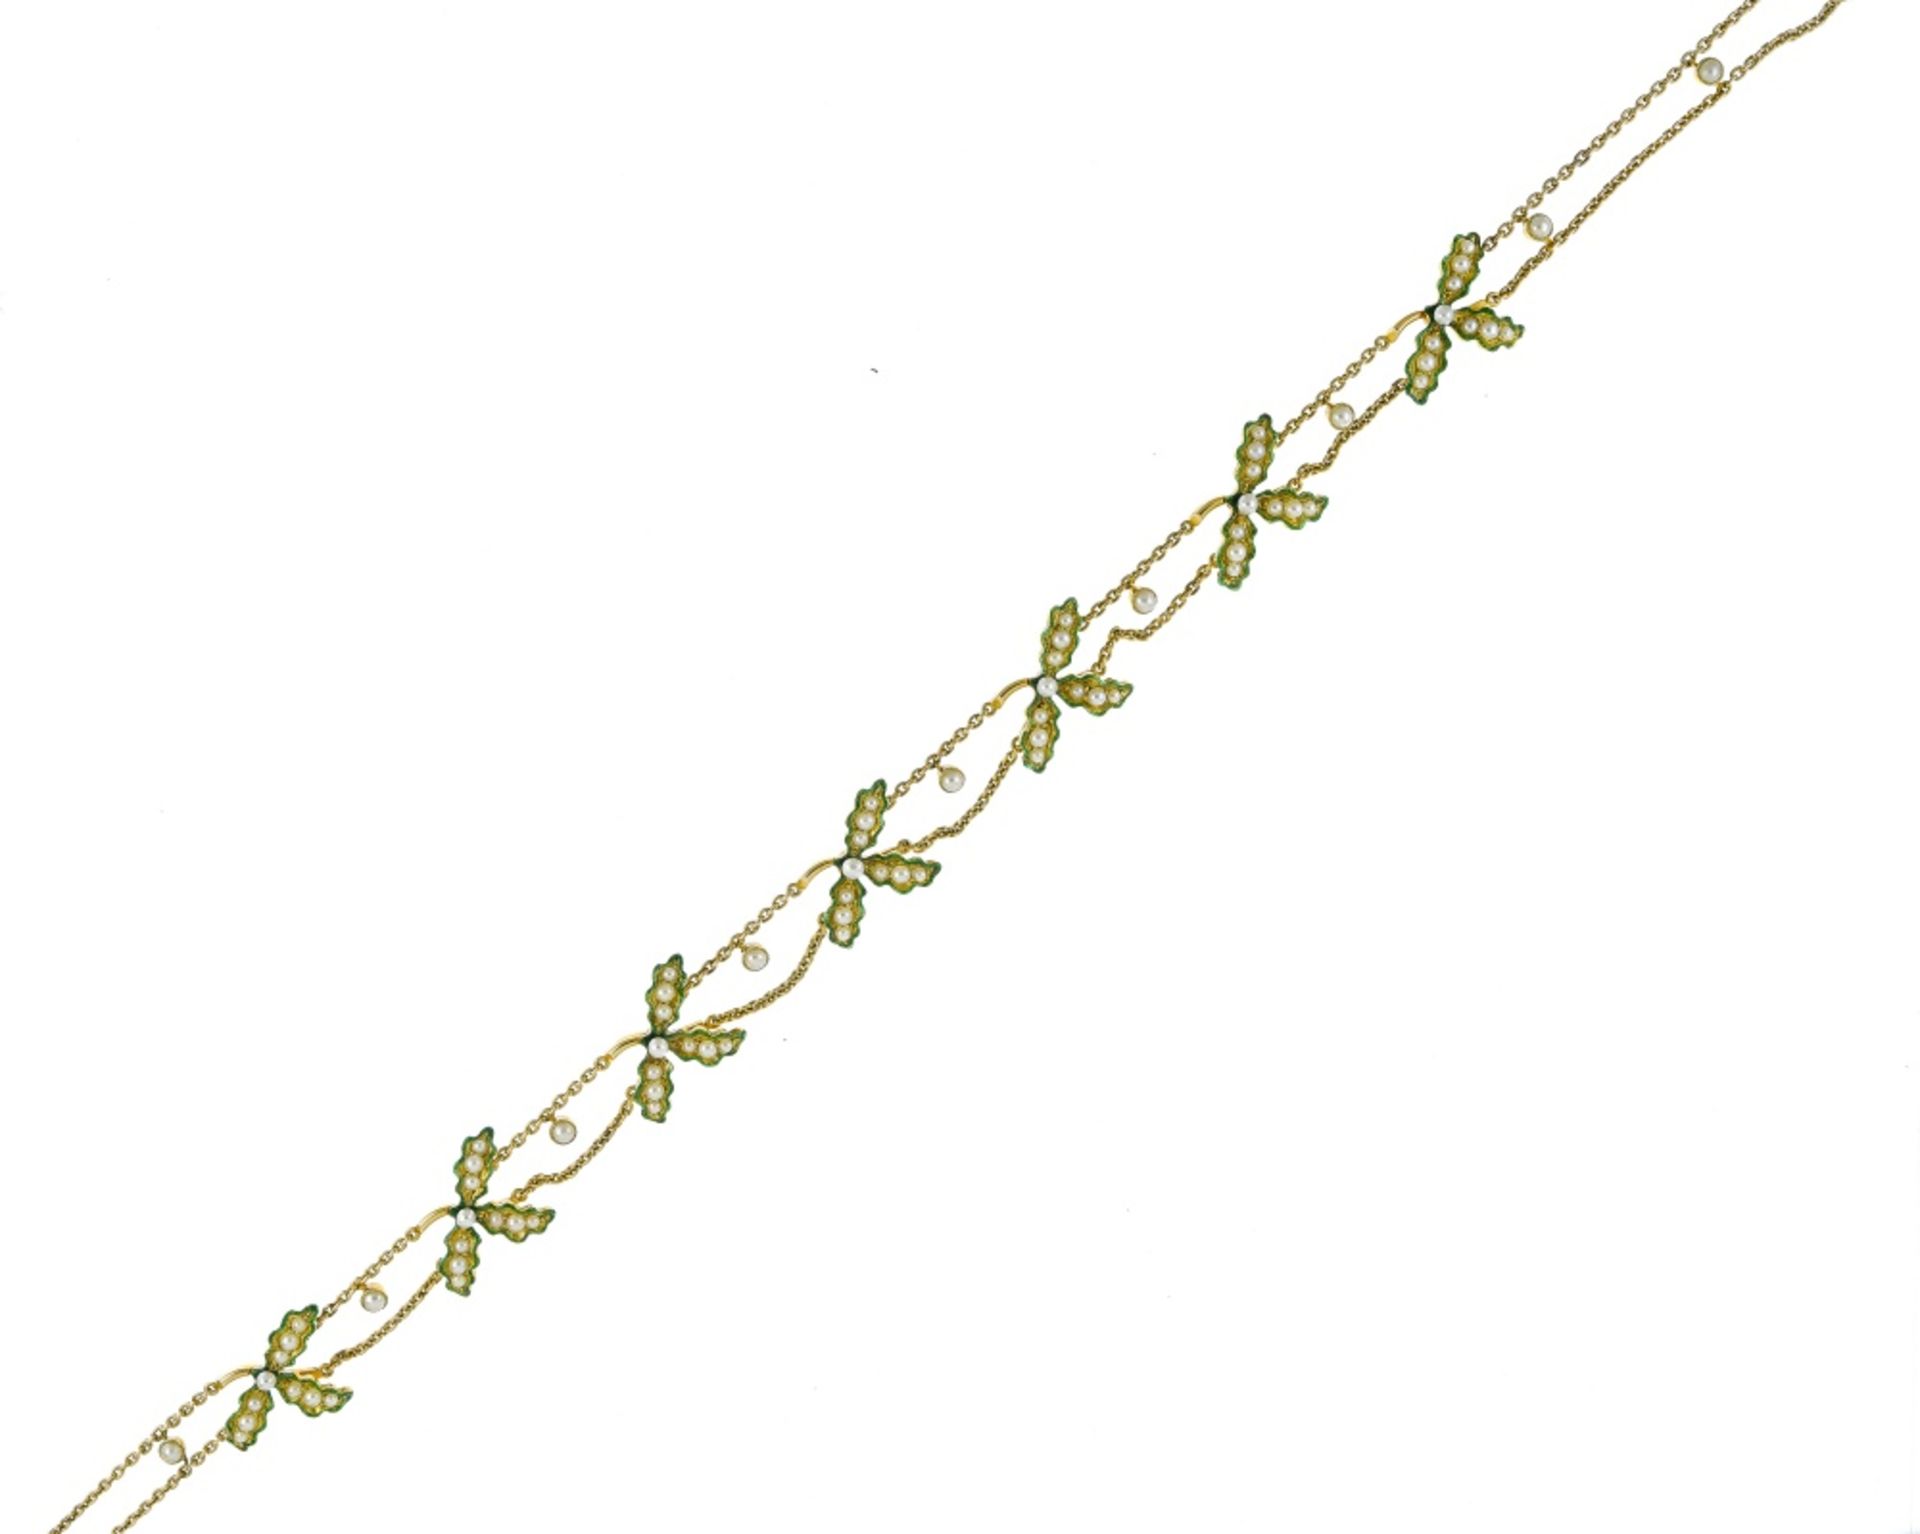 R.S. & A.P. Cufflin Romantic parure 18 kt and 15 kt yellow gold, composed of a choker necklace, a - Image 5 of 6